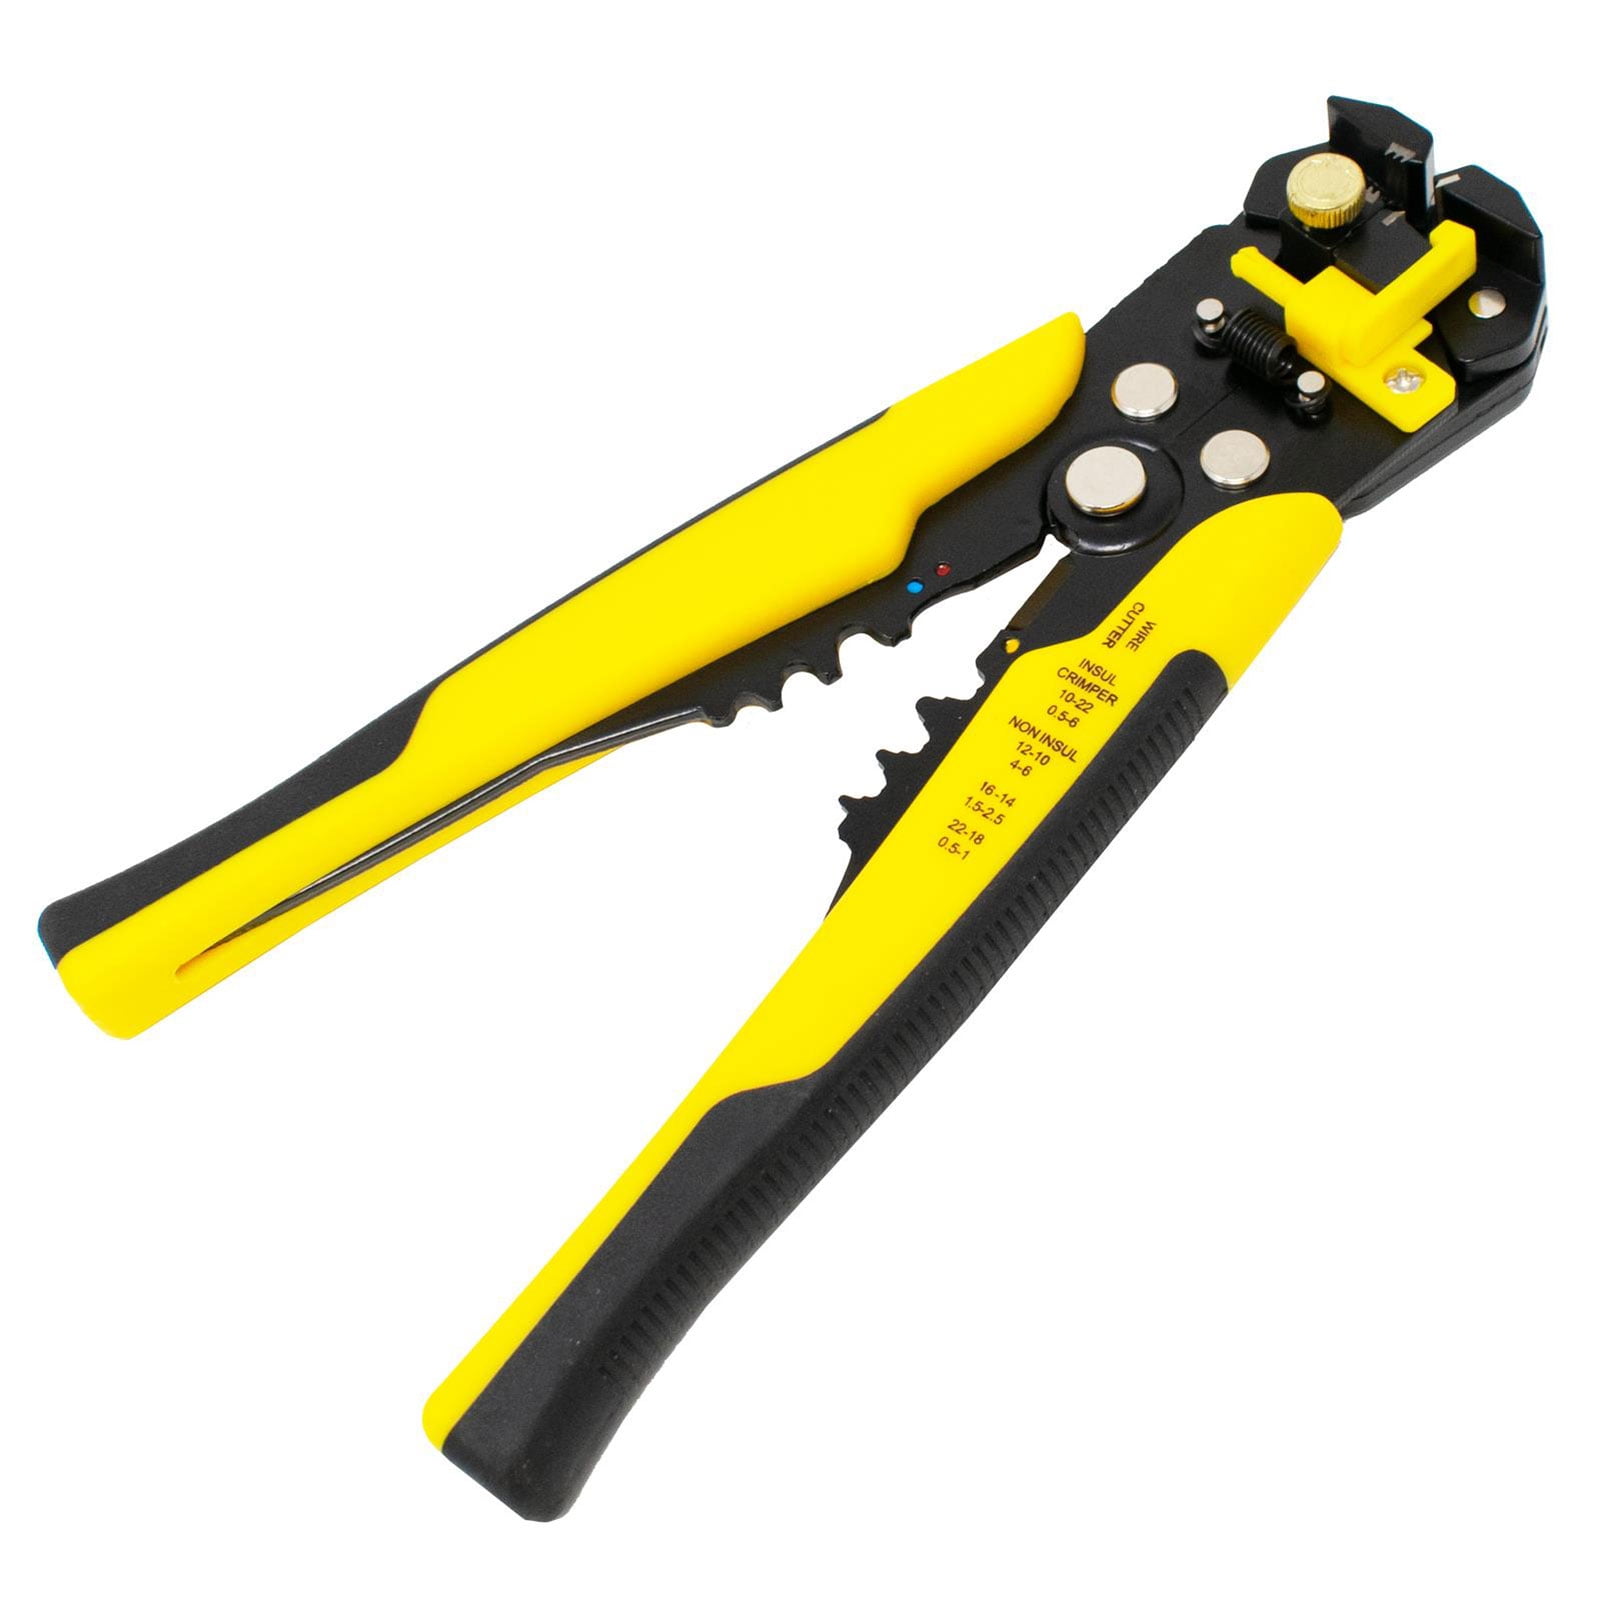 2 IN 1 Professional Wire Stripper Cable Cutter Multi-Function Hand Tool 22-10AWG